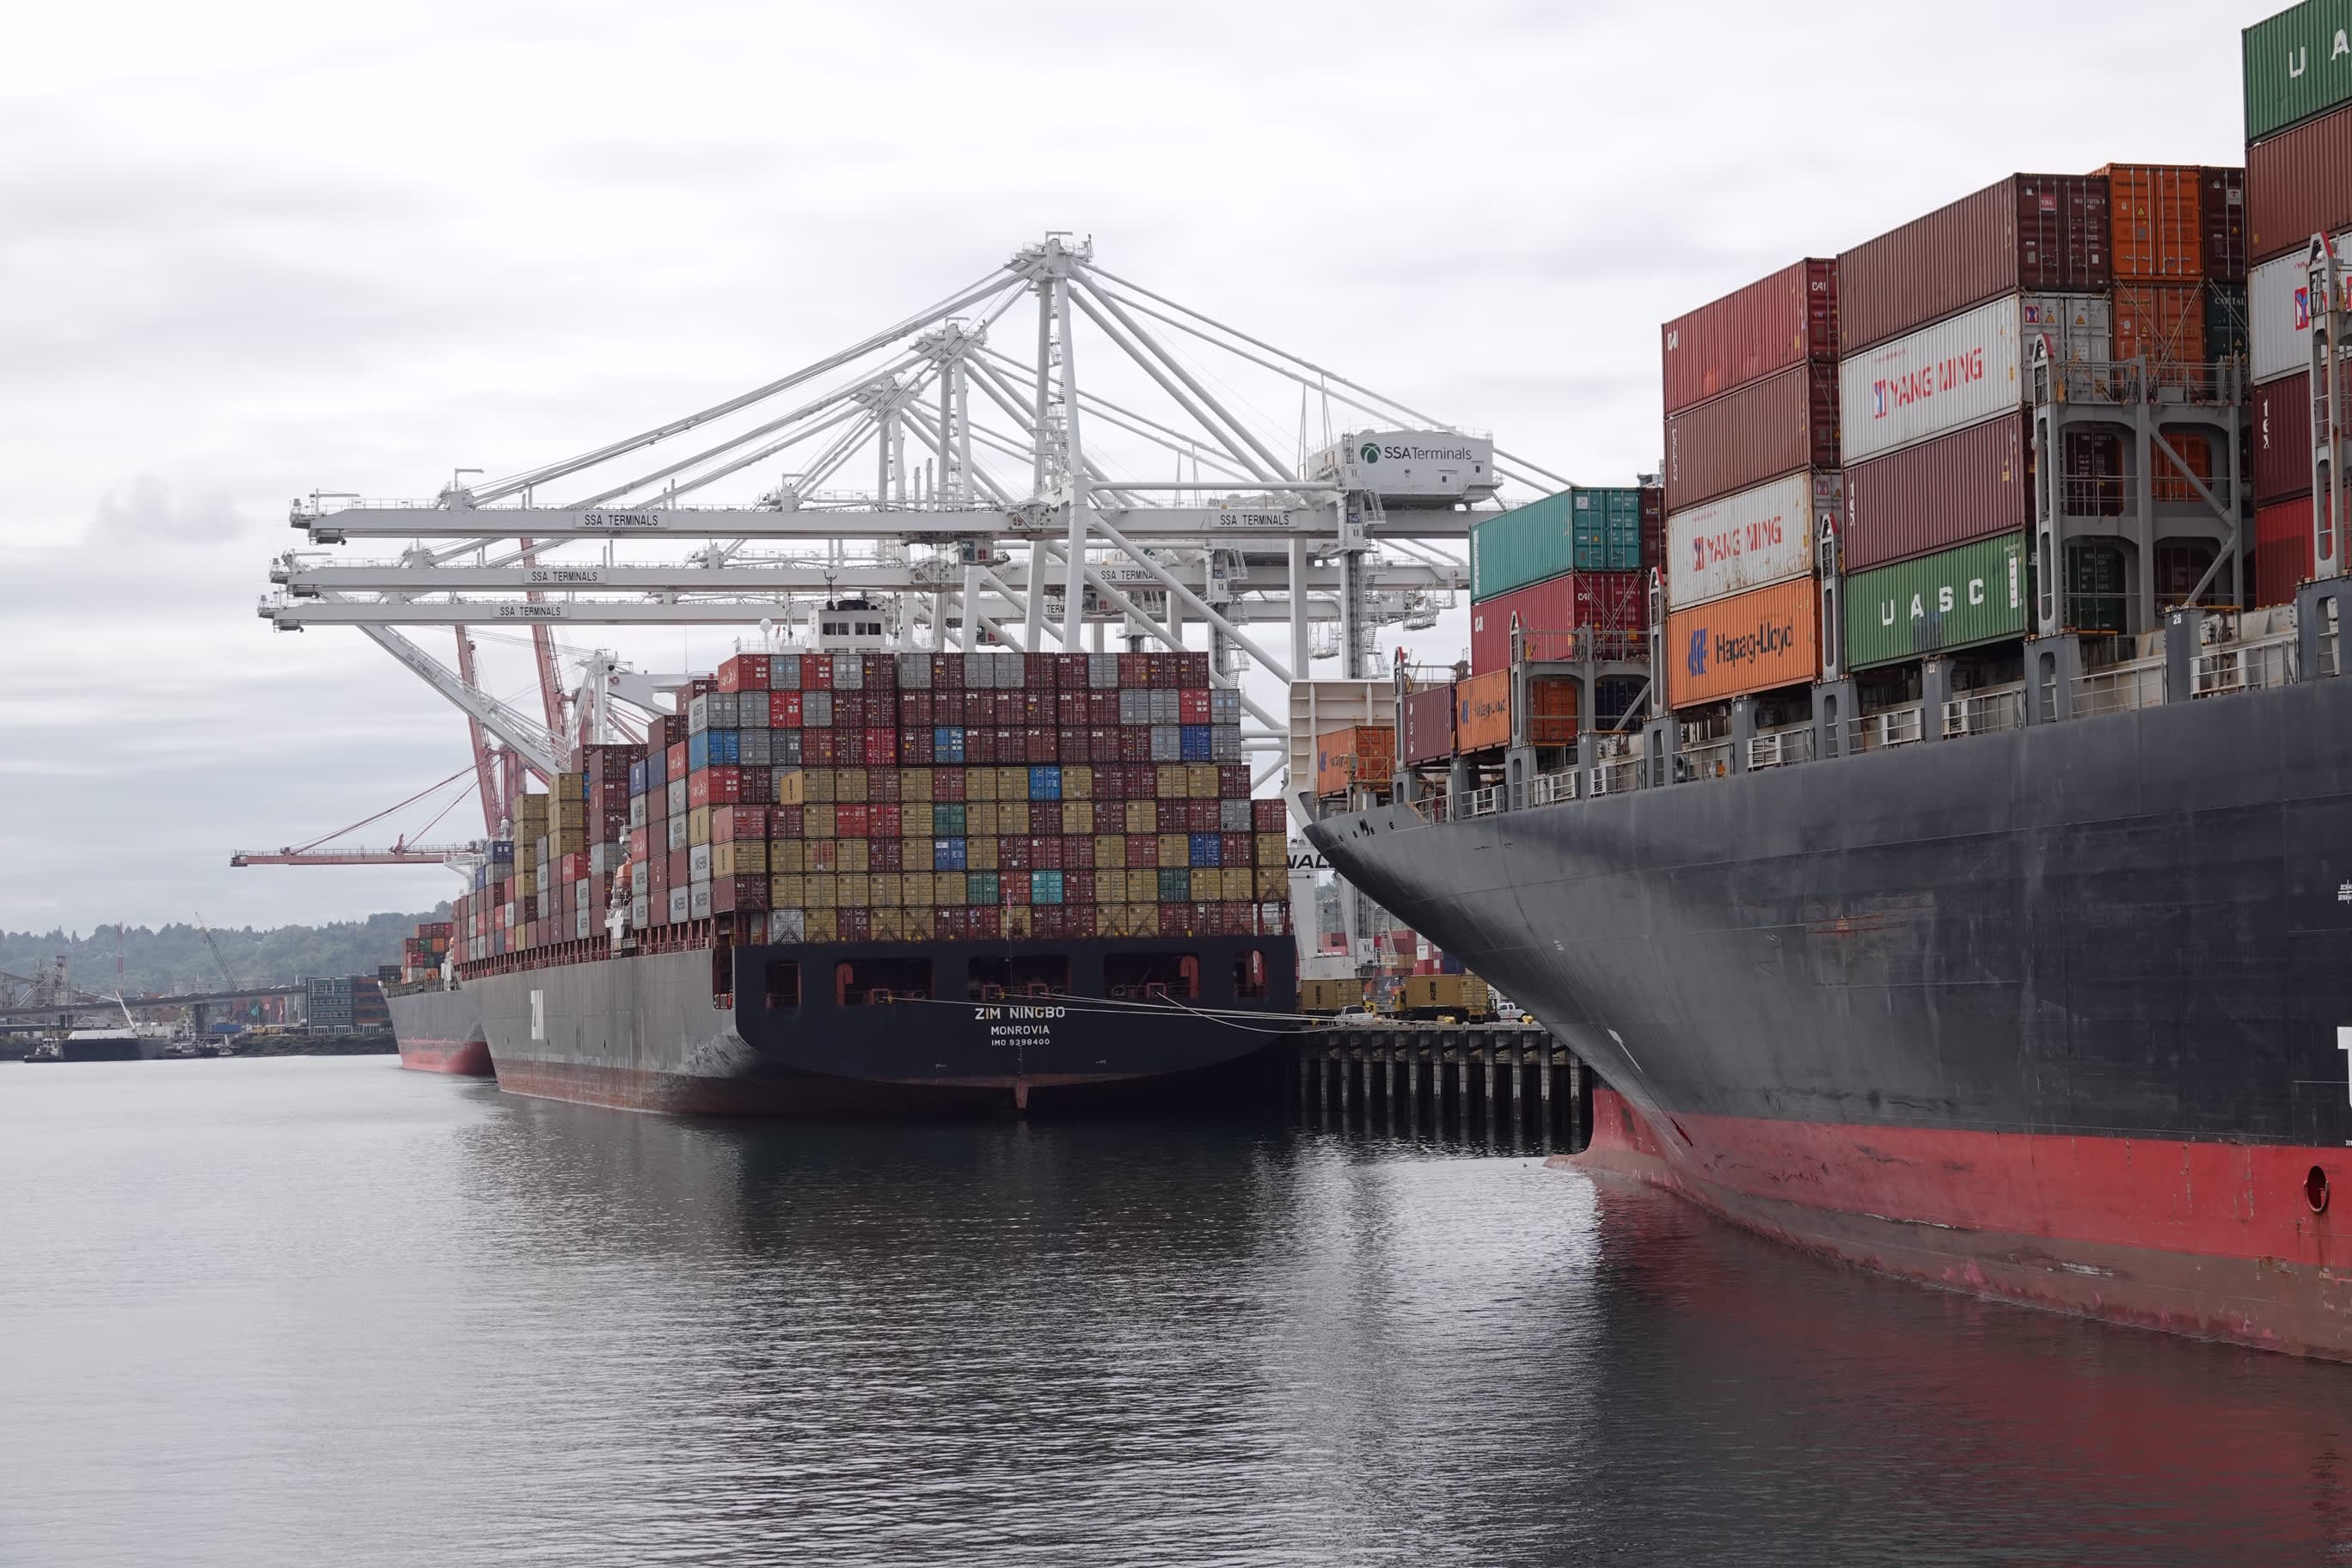 The Port of Seattle was closed due to ILWU labor strikes